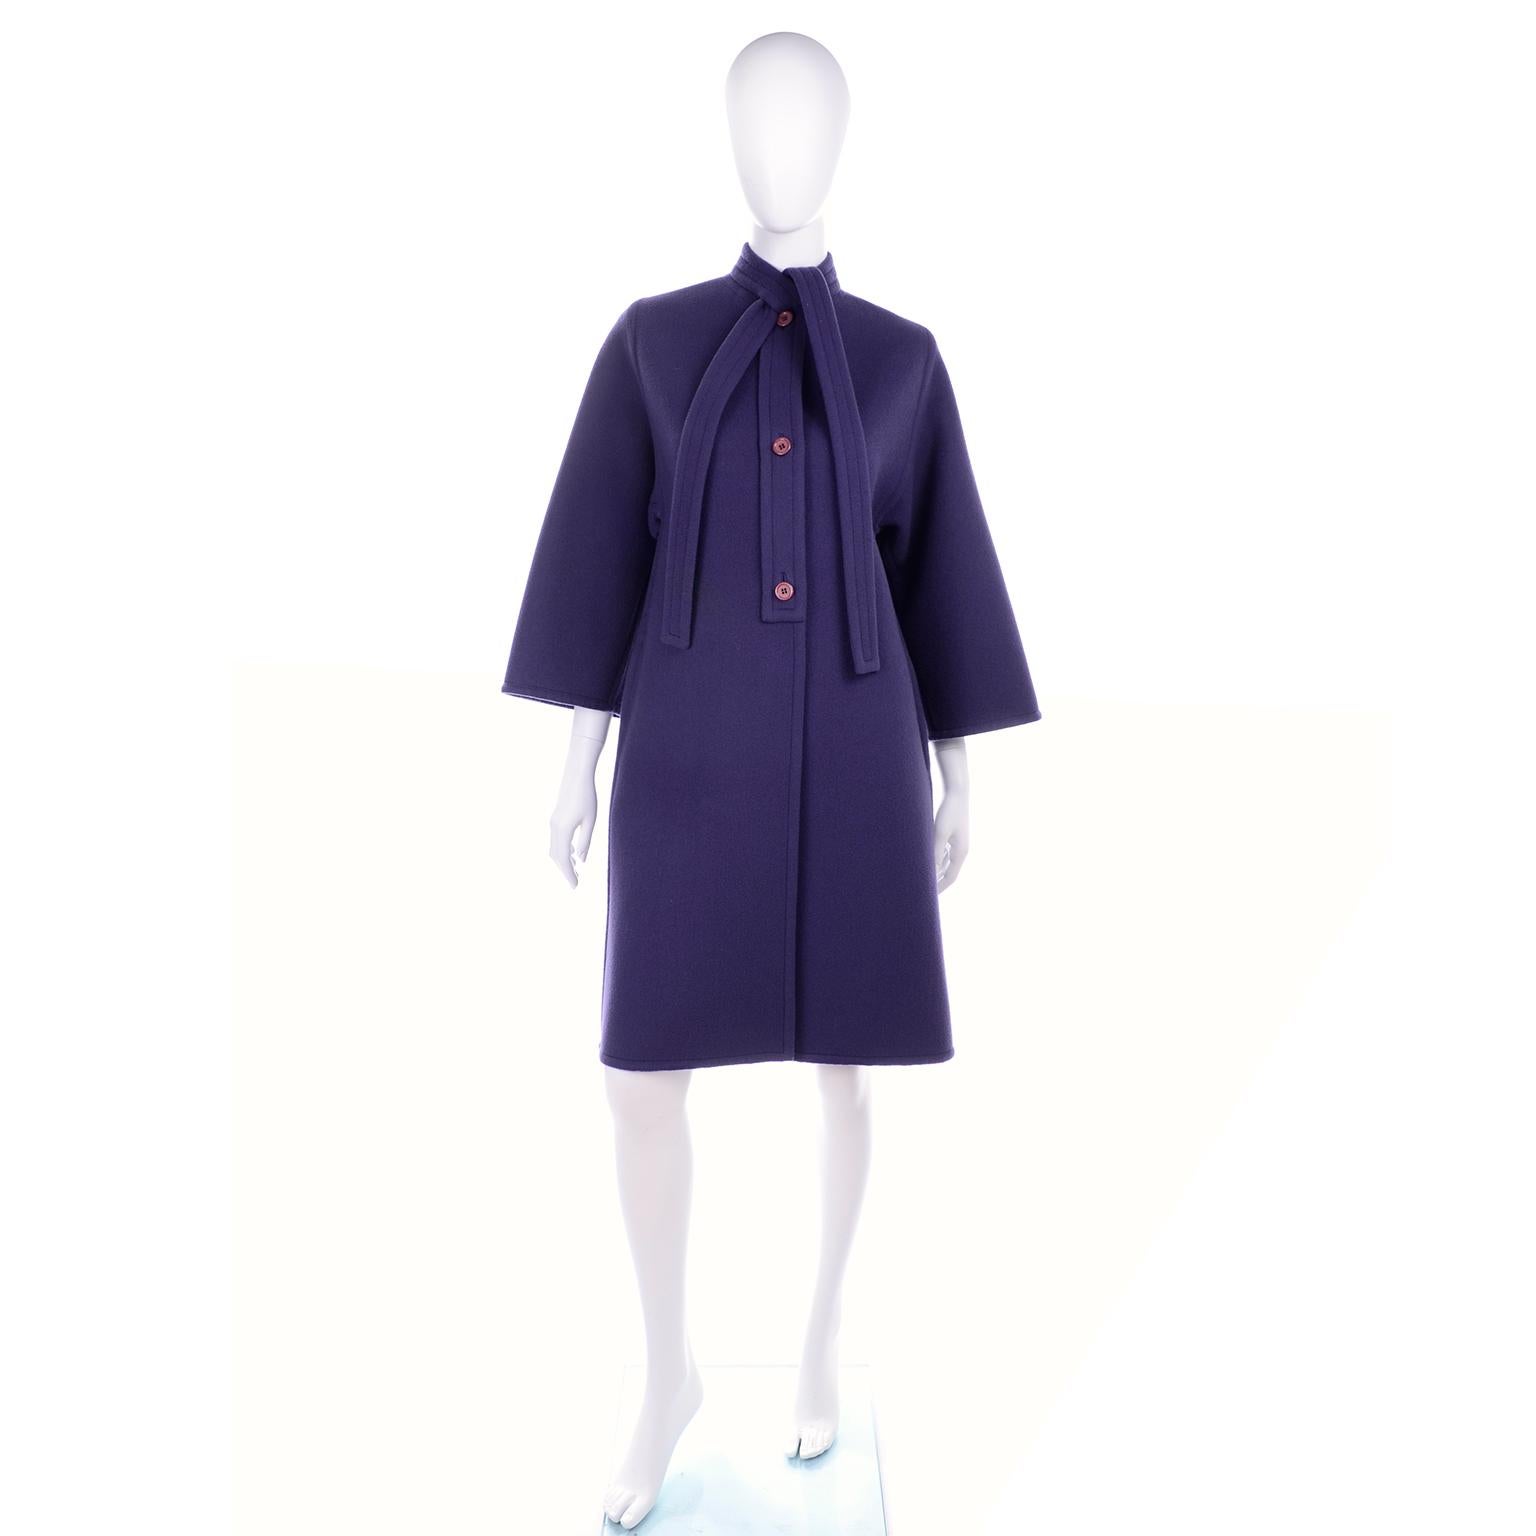 This is a beautiful vintage Galanos cool tone purple wool coat. This great coat has front pockets, a tie at the neck, and it closes with 3 front buttons. We love the wide sleeves and the big center pleat in the back. Galanos pieces are always